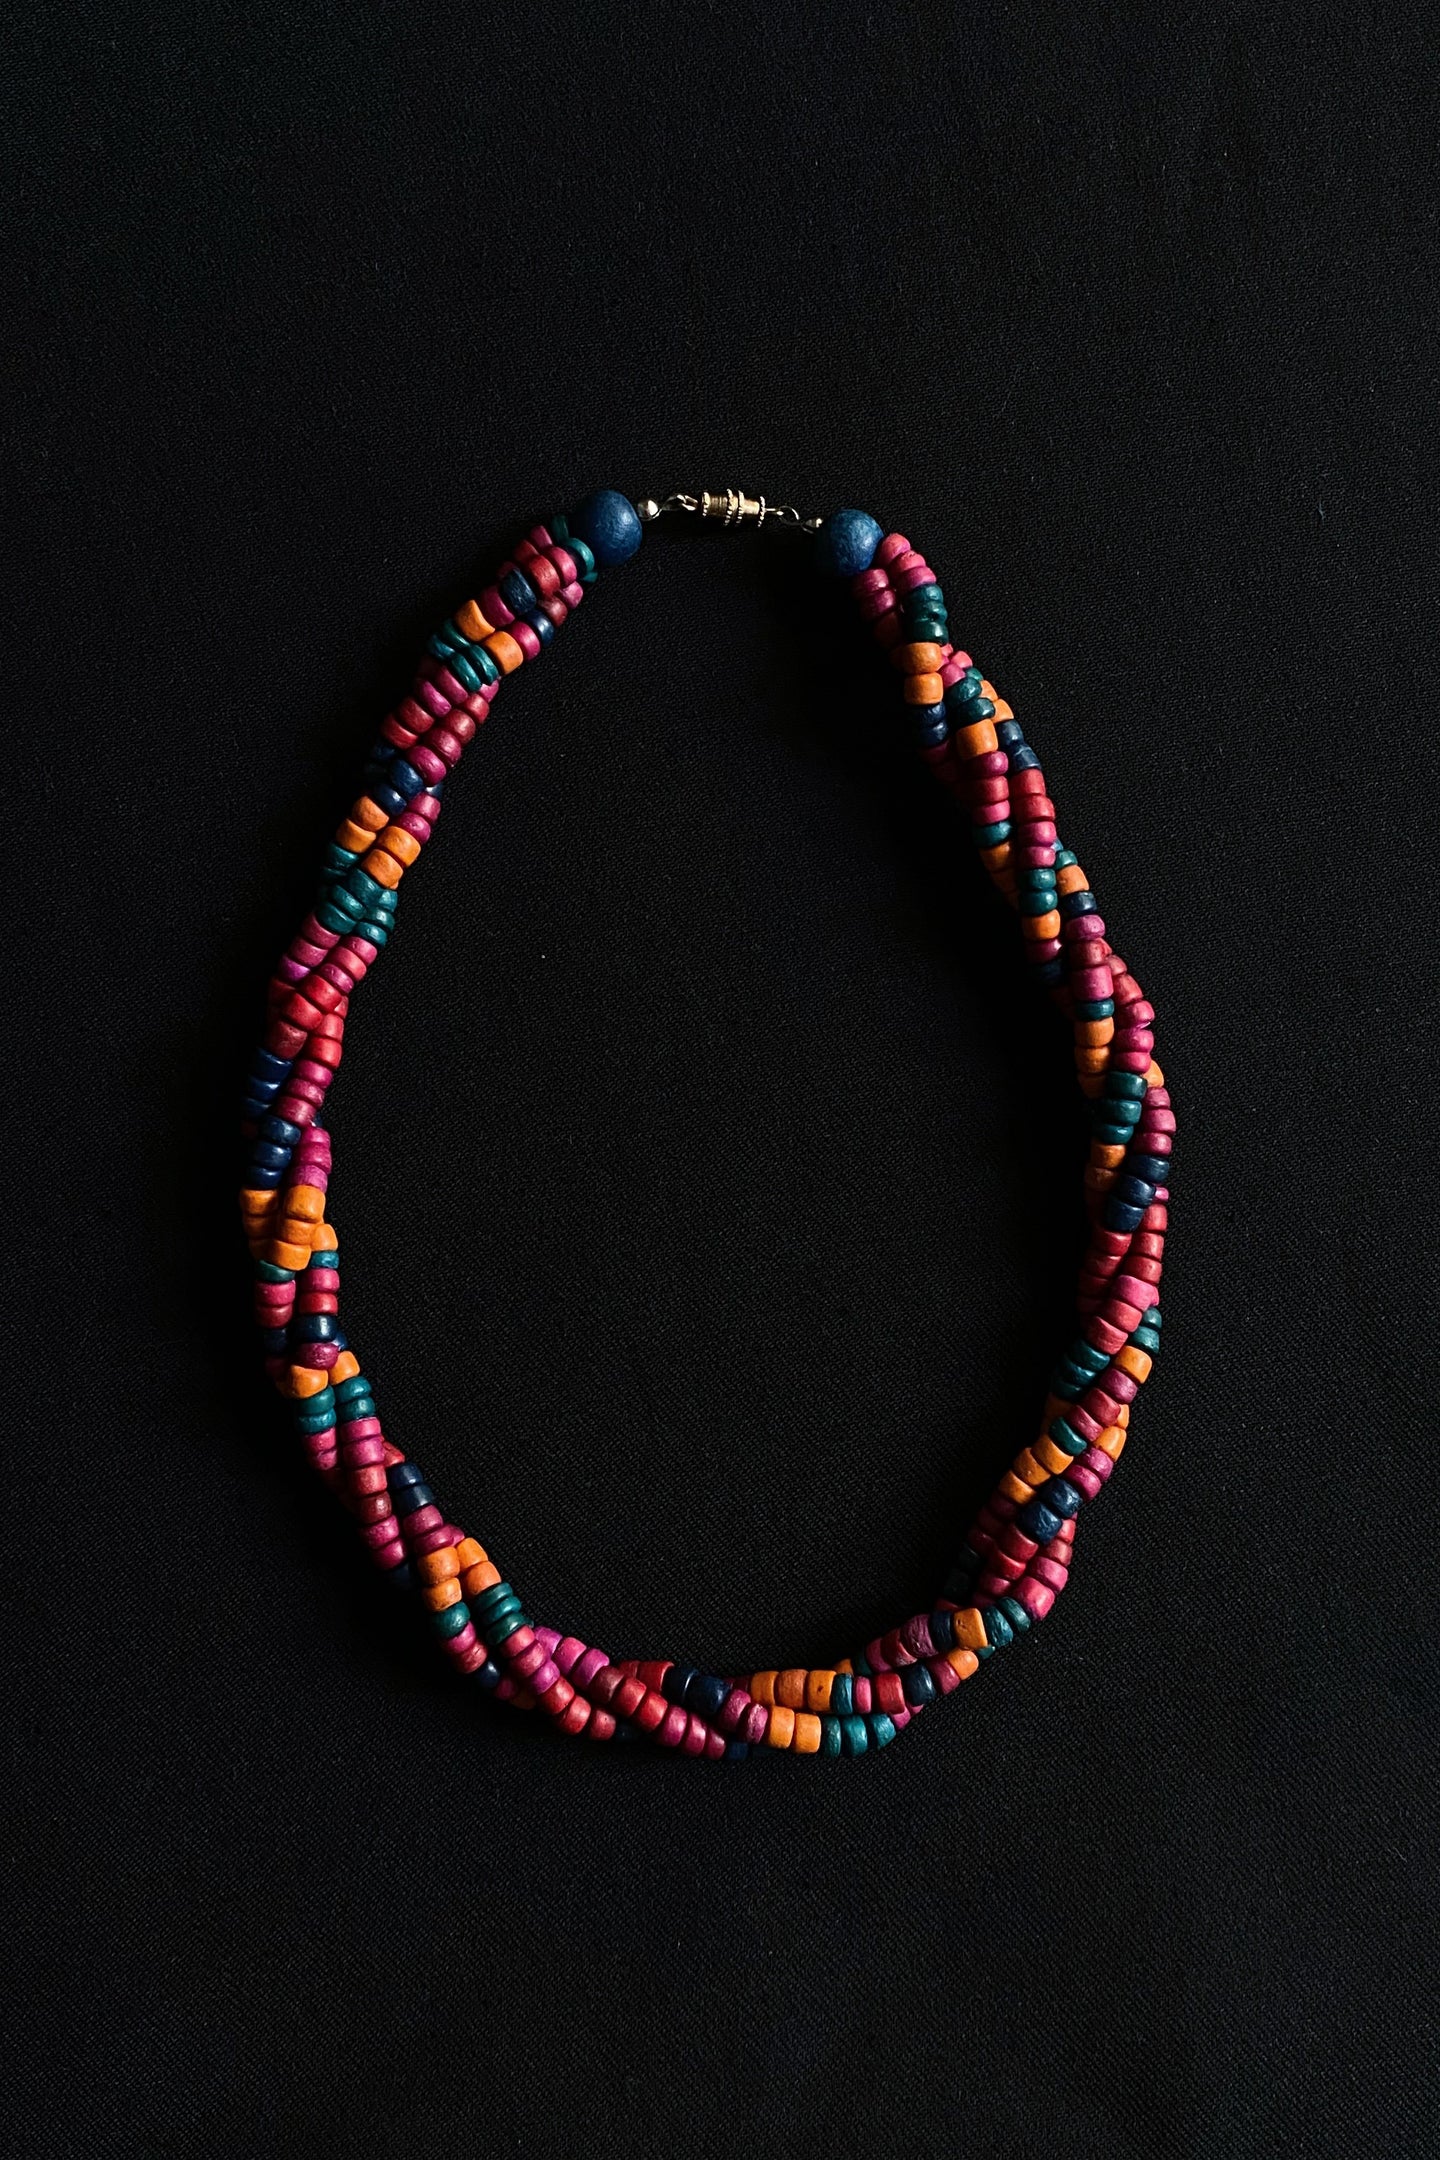 FUCHSIA TWISTED COLORFUL BEADS NECKLACE